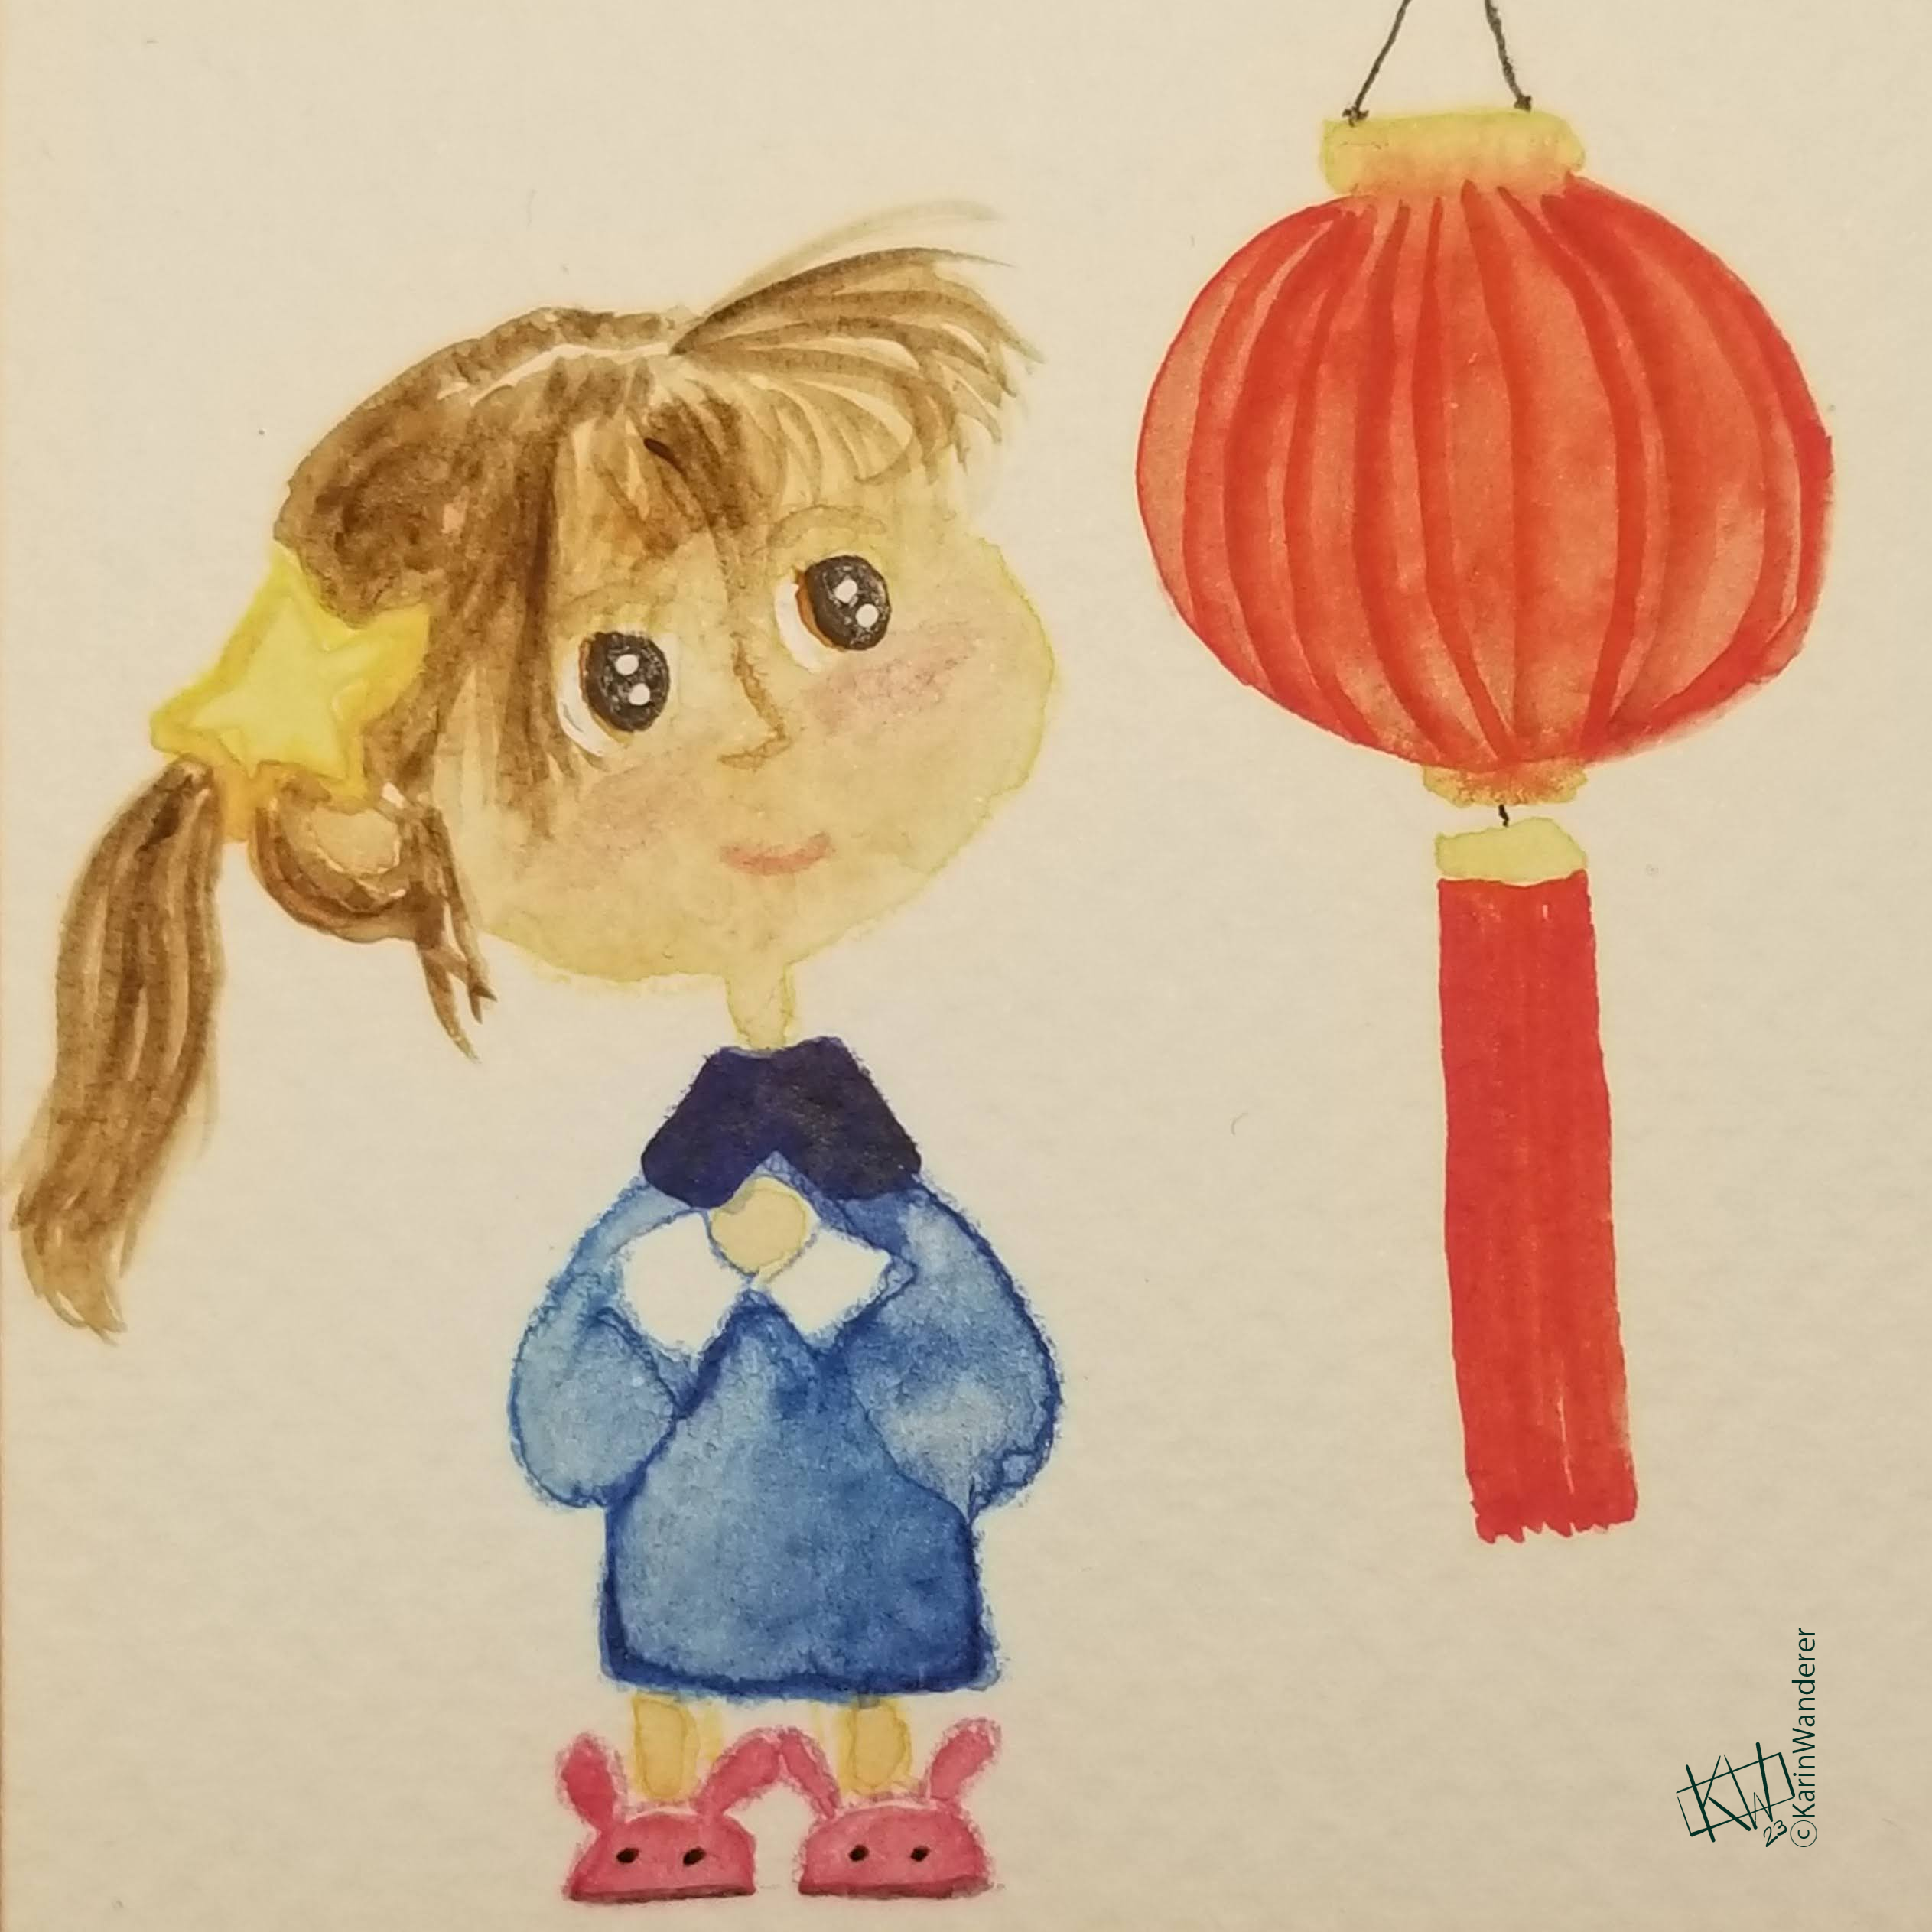 Watercolor little girl in a blue dress & bunny slippers smiling as she looks at a red lantern.